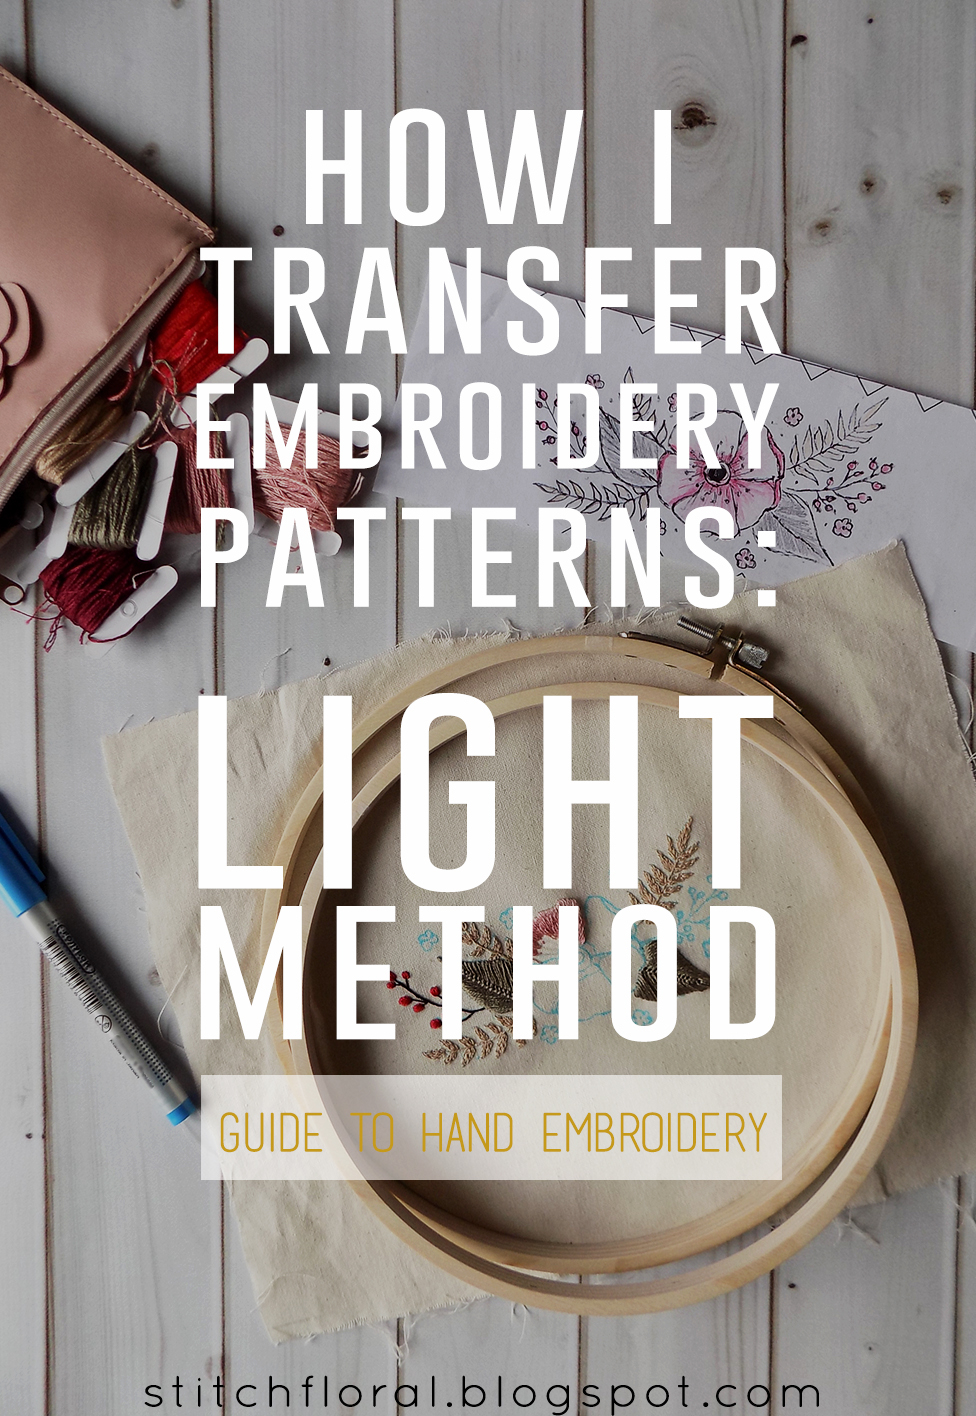 Embroidery Transfer Patterns How I Transfer Embroidery Patterns Light Method Stitch Floral